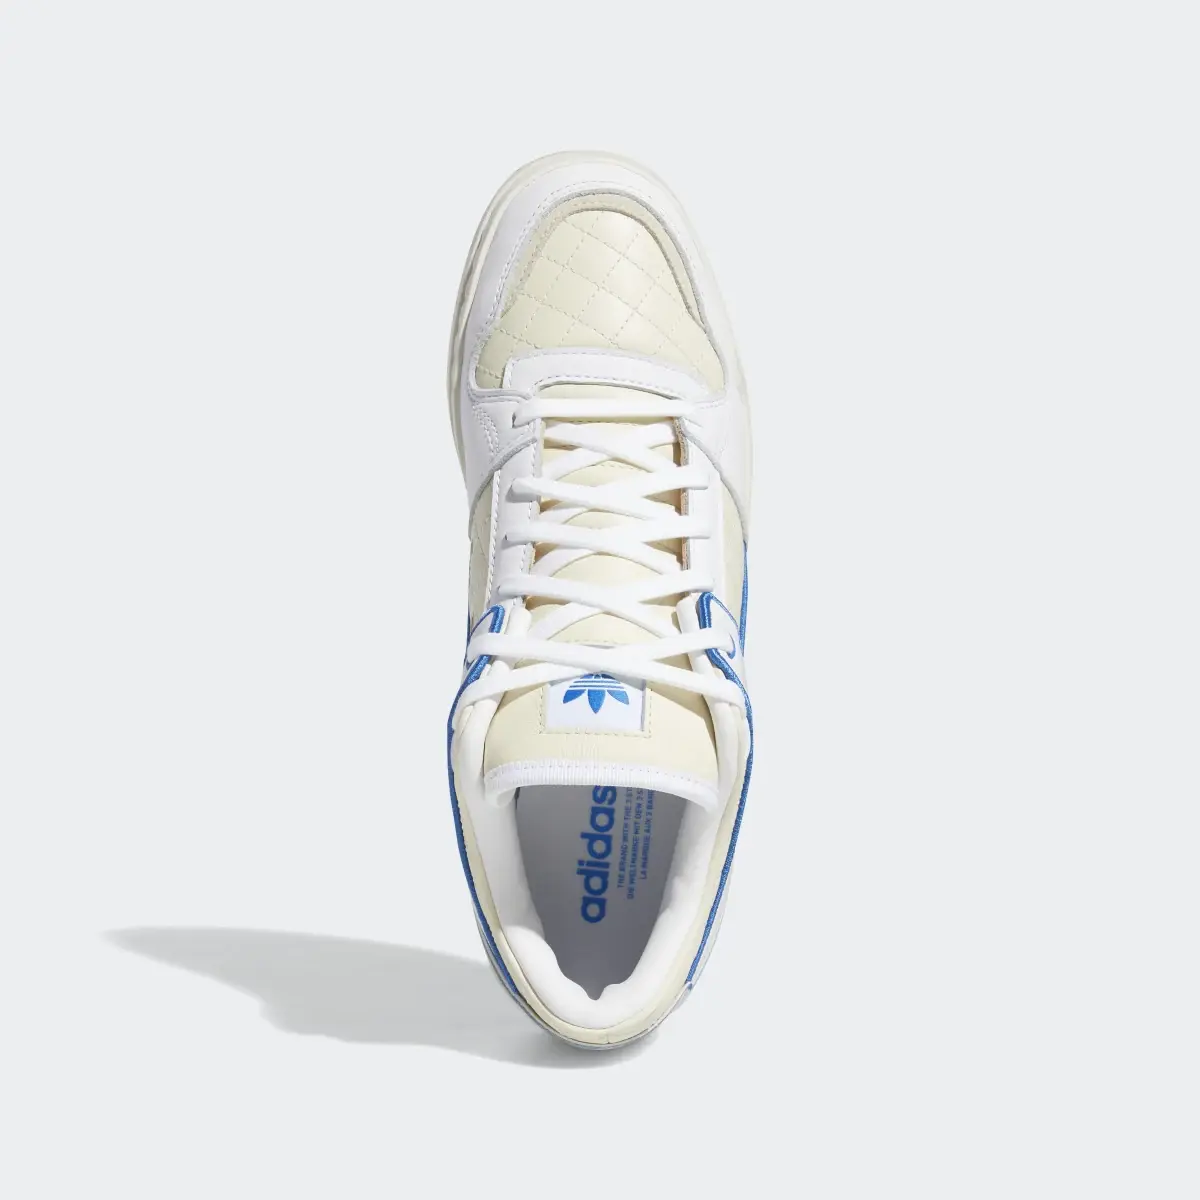 Adidas Forum Luxe Low Shoes. 3